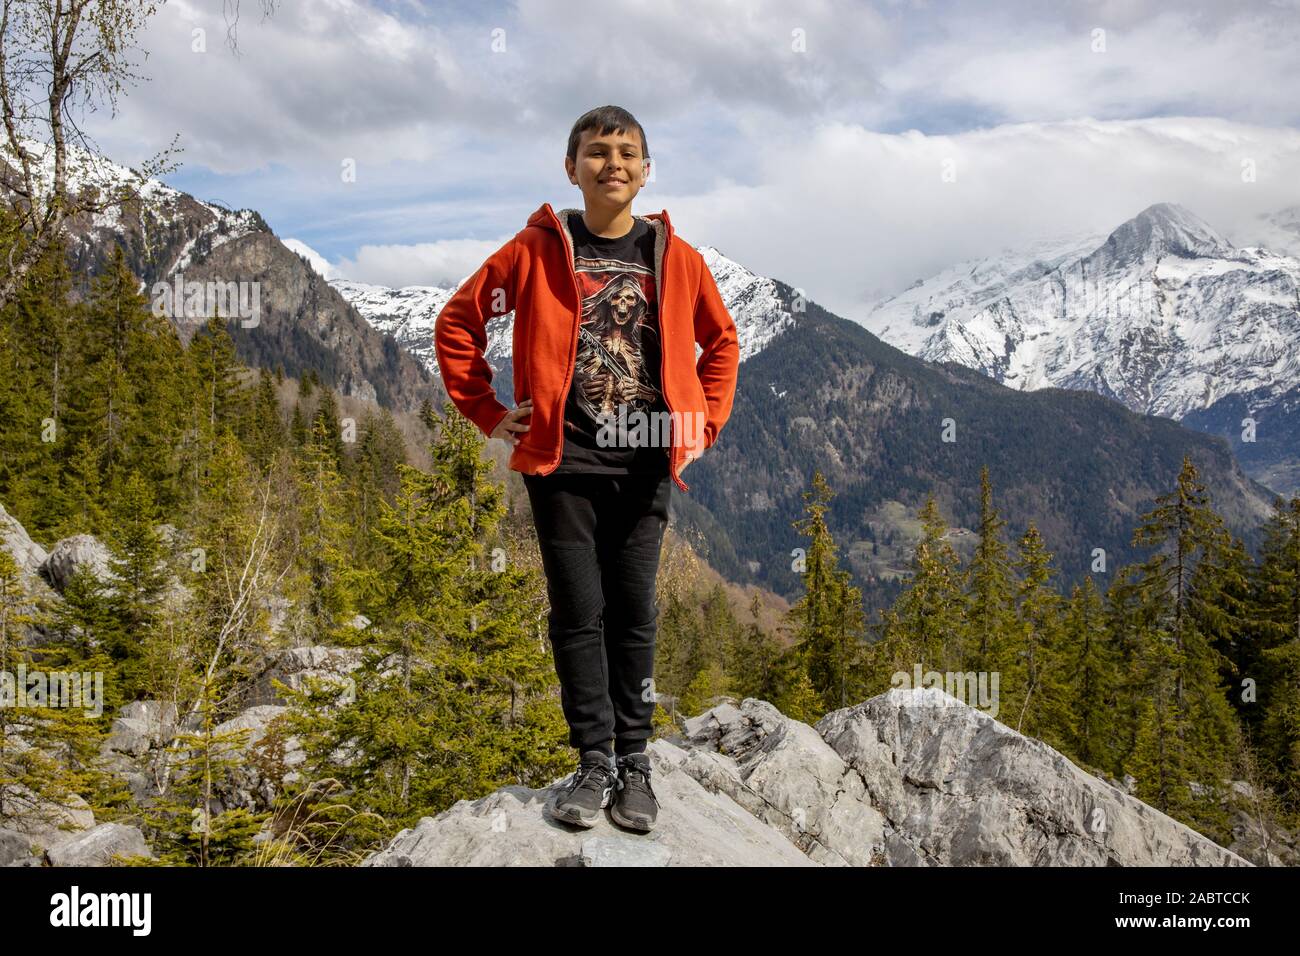 13-year-old boy on vacation in Haute Savoie, France. Stock Photo